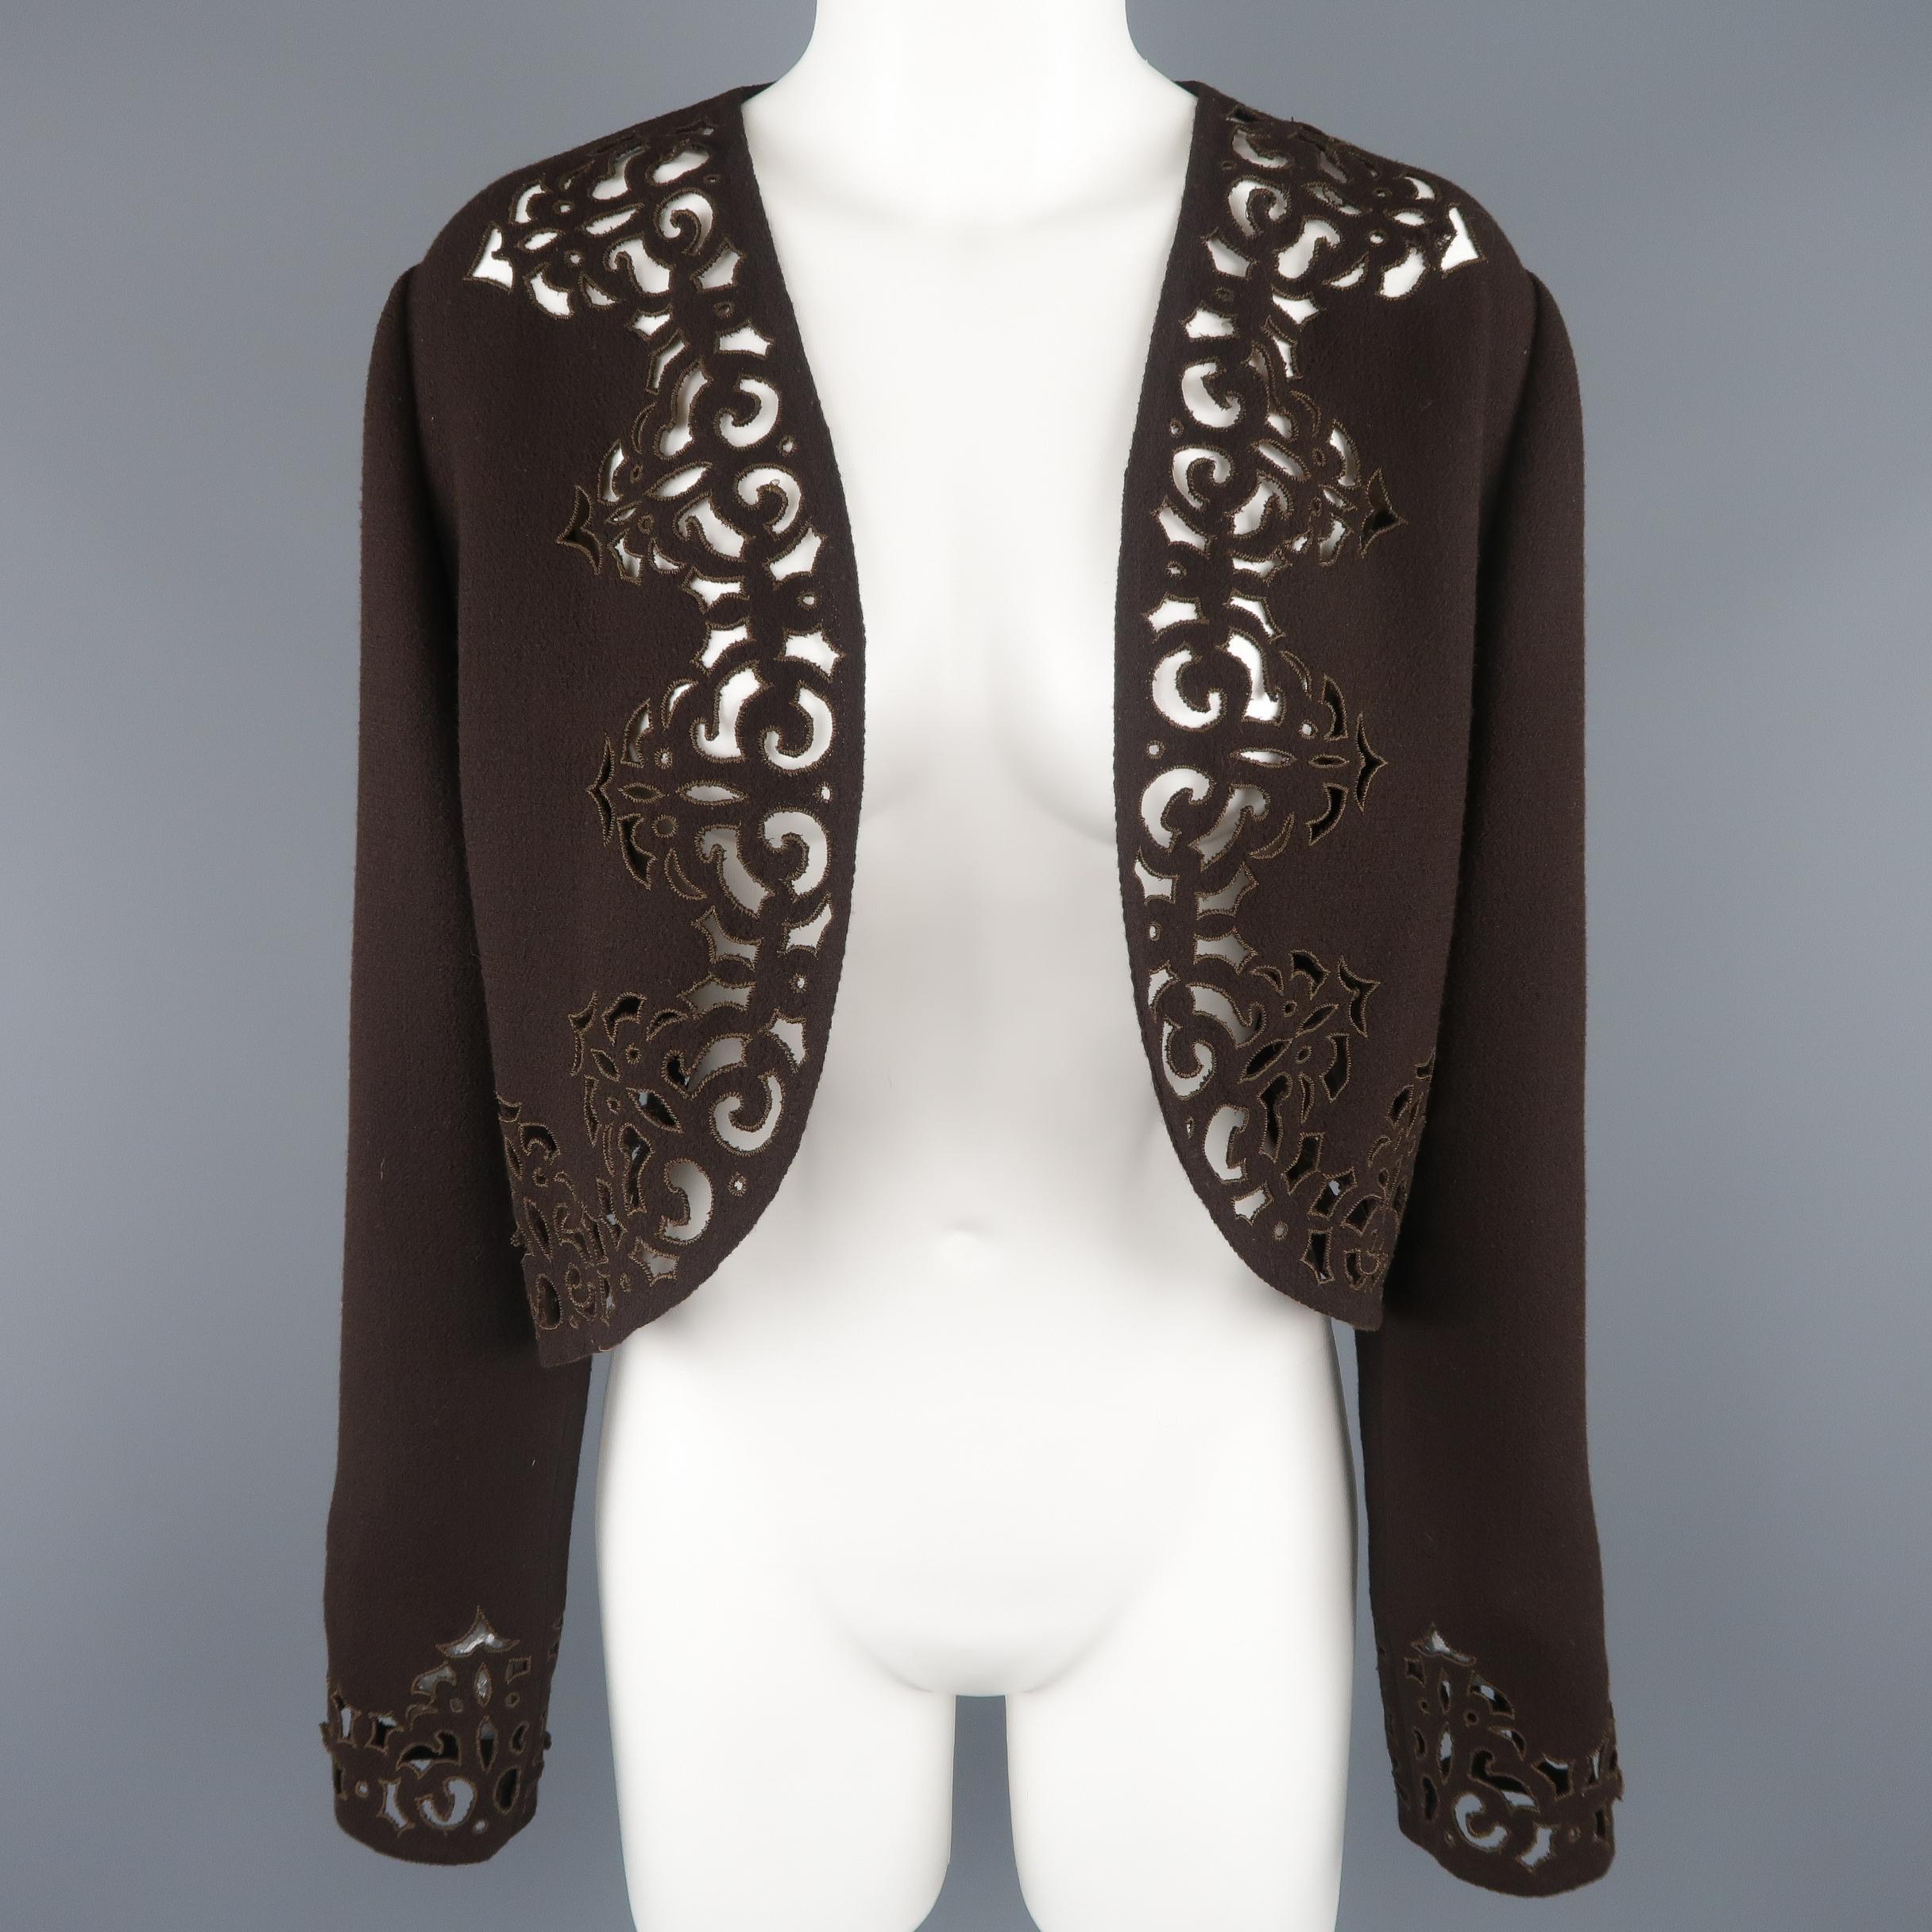 Vintage BILL BLASS bolero jacket comes in rich brown wool blend crepe with an open front, cropped hem, and cutout floral trim. Made in USA.
 
Excellent Pre-Owned Condition.
Marked: 12
 
Measurements:
 
Shoulder: 18 in.
Bust: 42 in.
Sleeve: 20